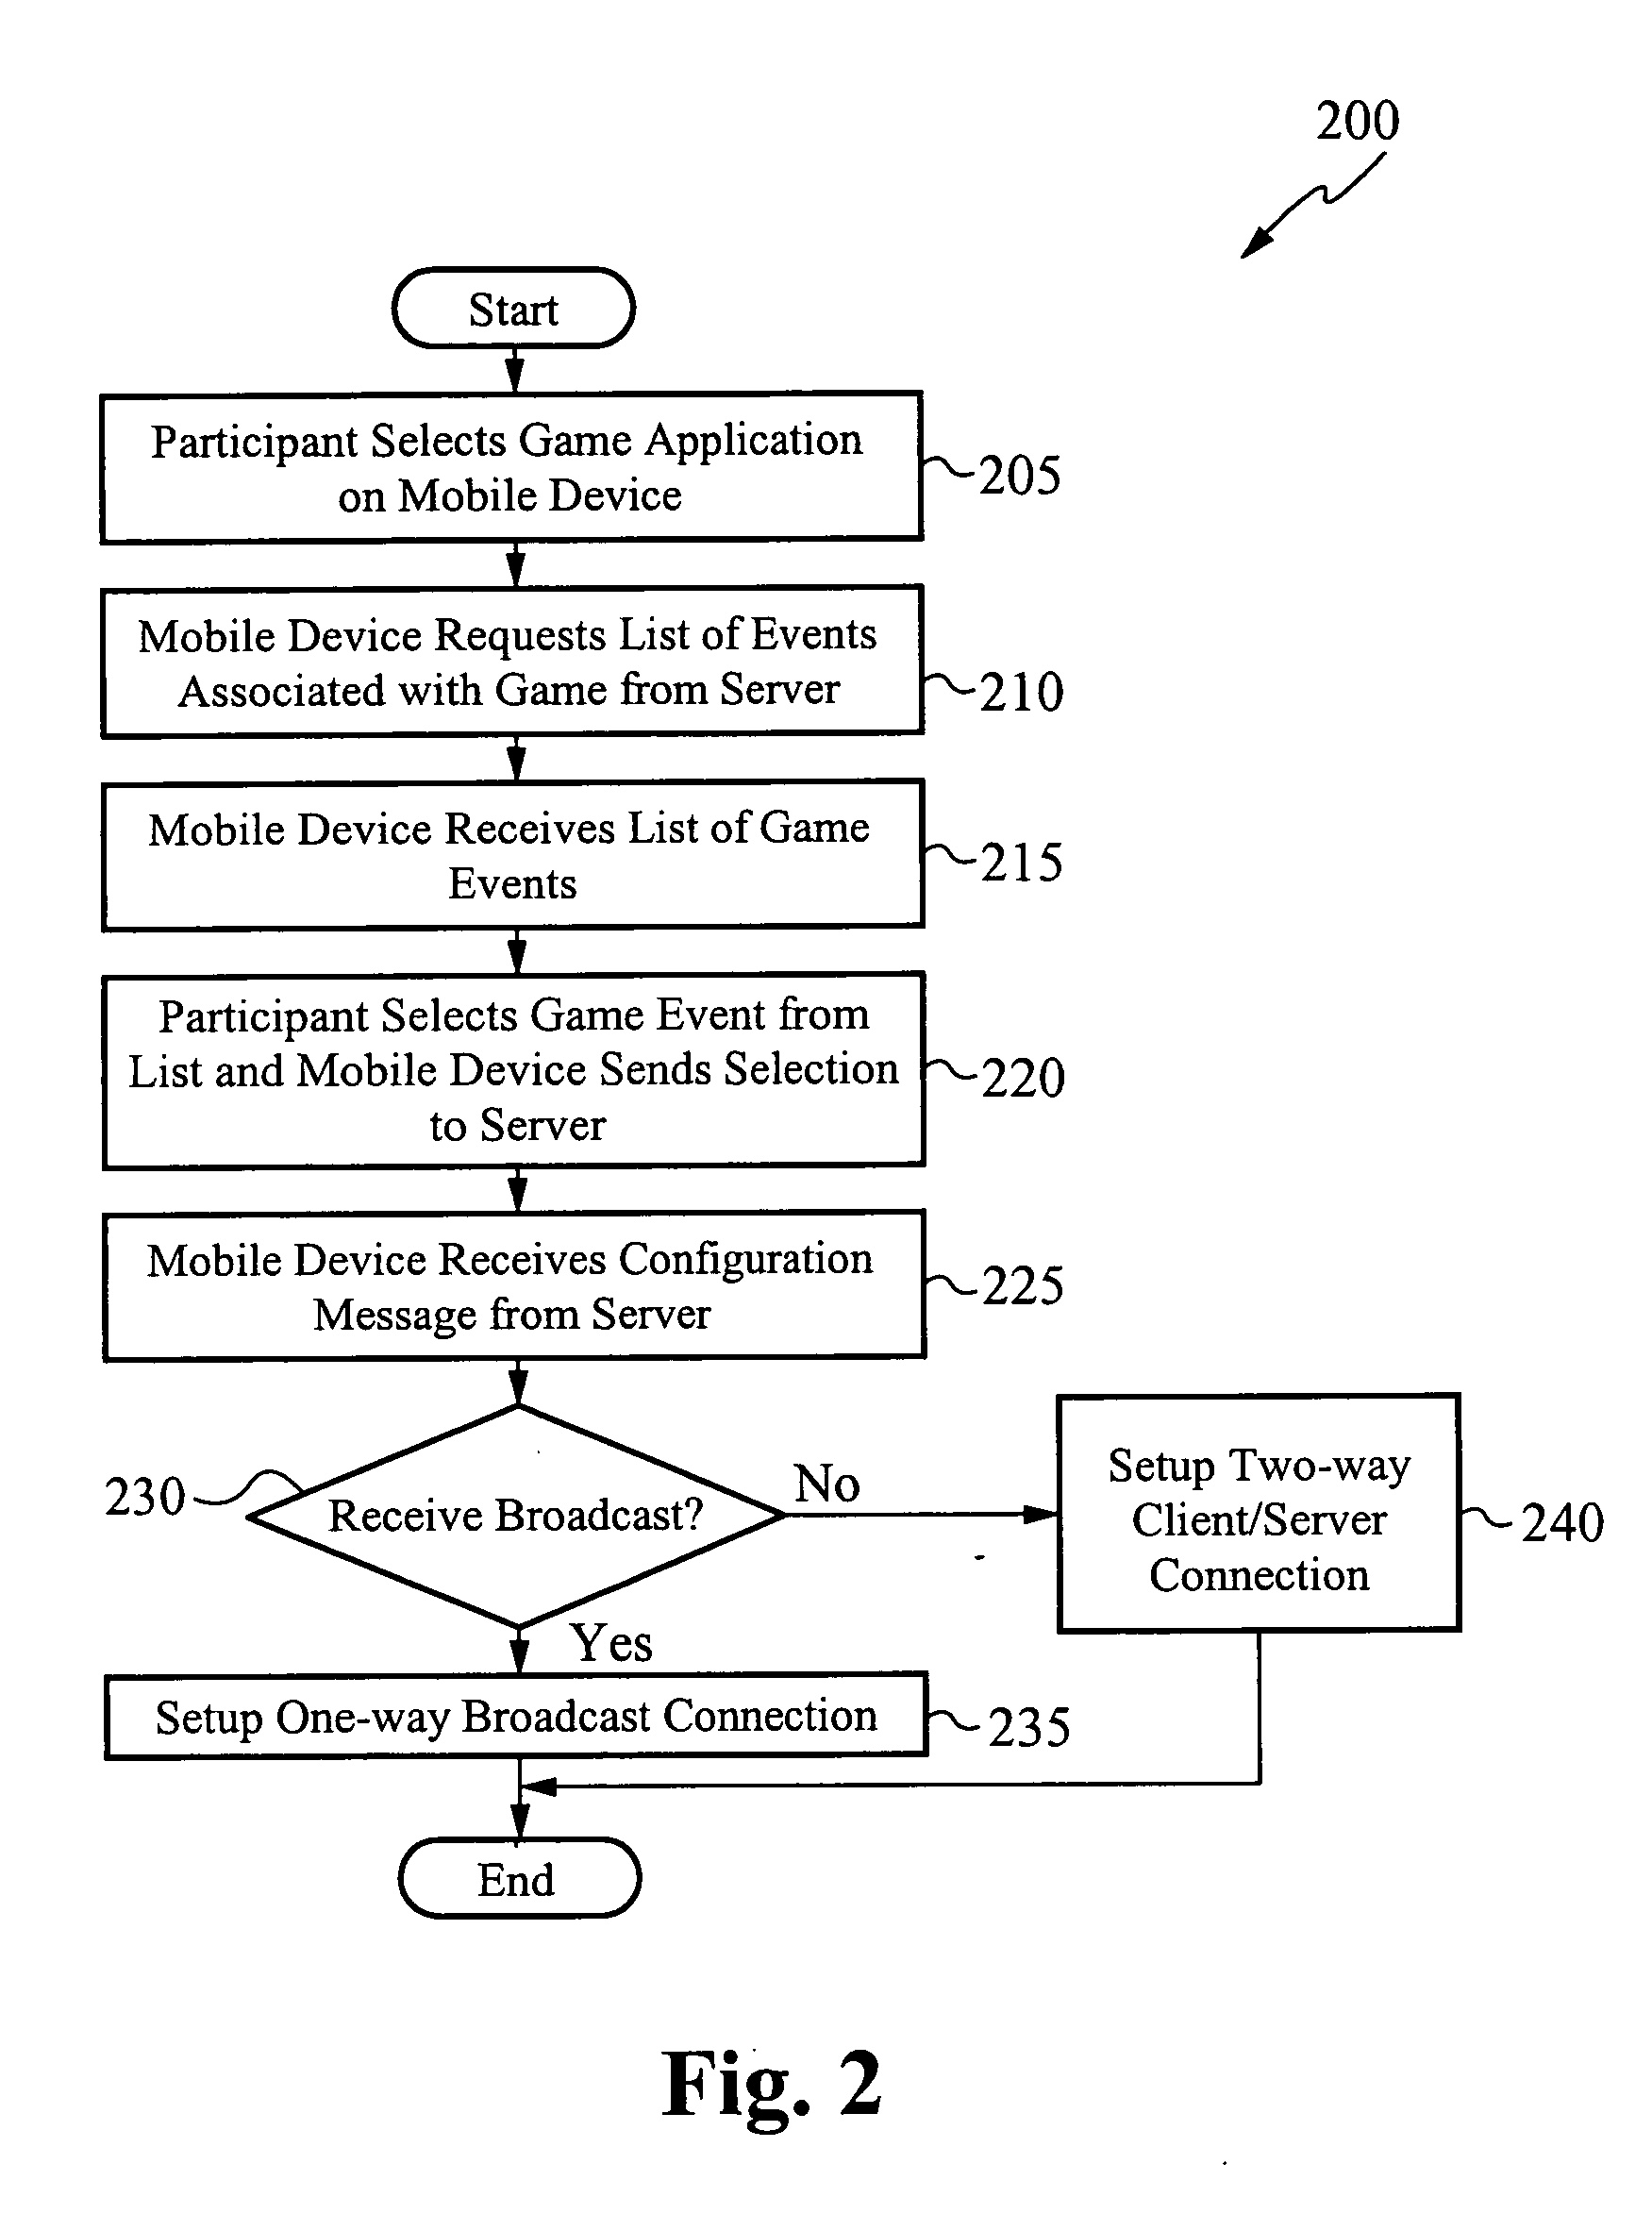 Methods and apparatus for distributed gaming over a mobile device